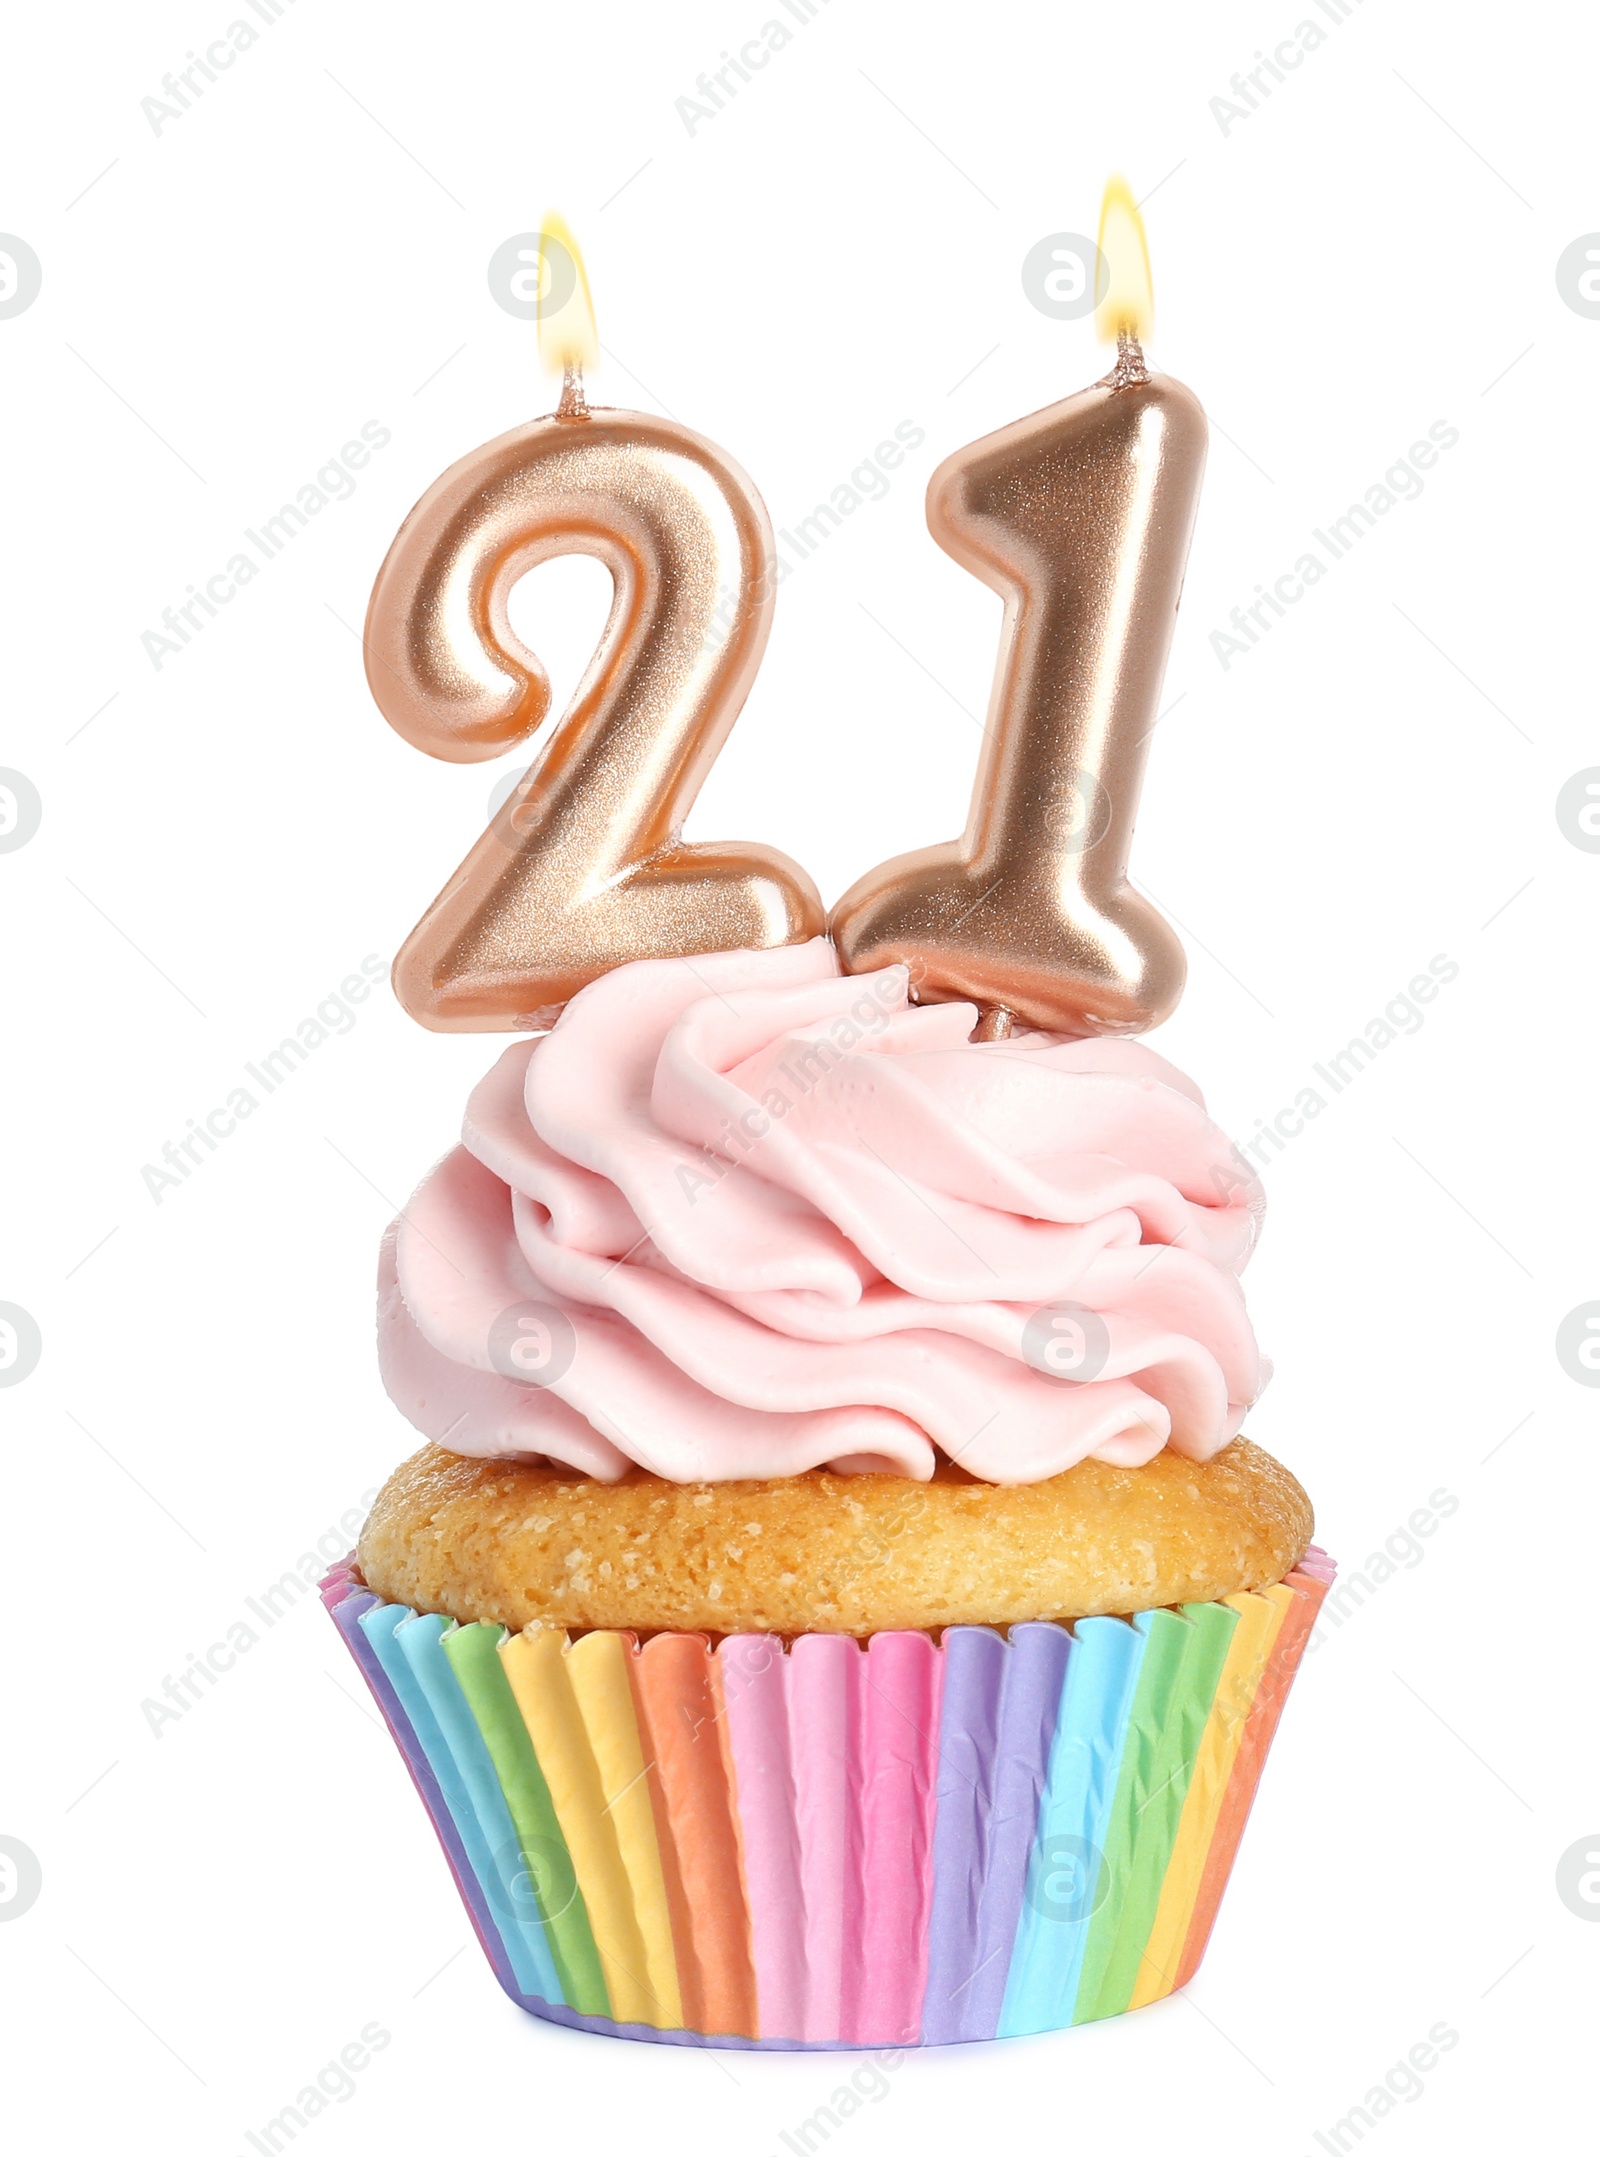 Photo of Delicious cupcake with number shaped candles on white background. Coming of age party - 21th birthday